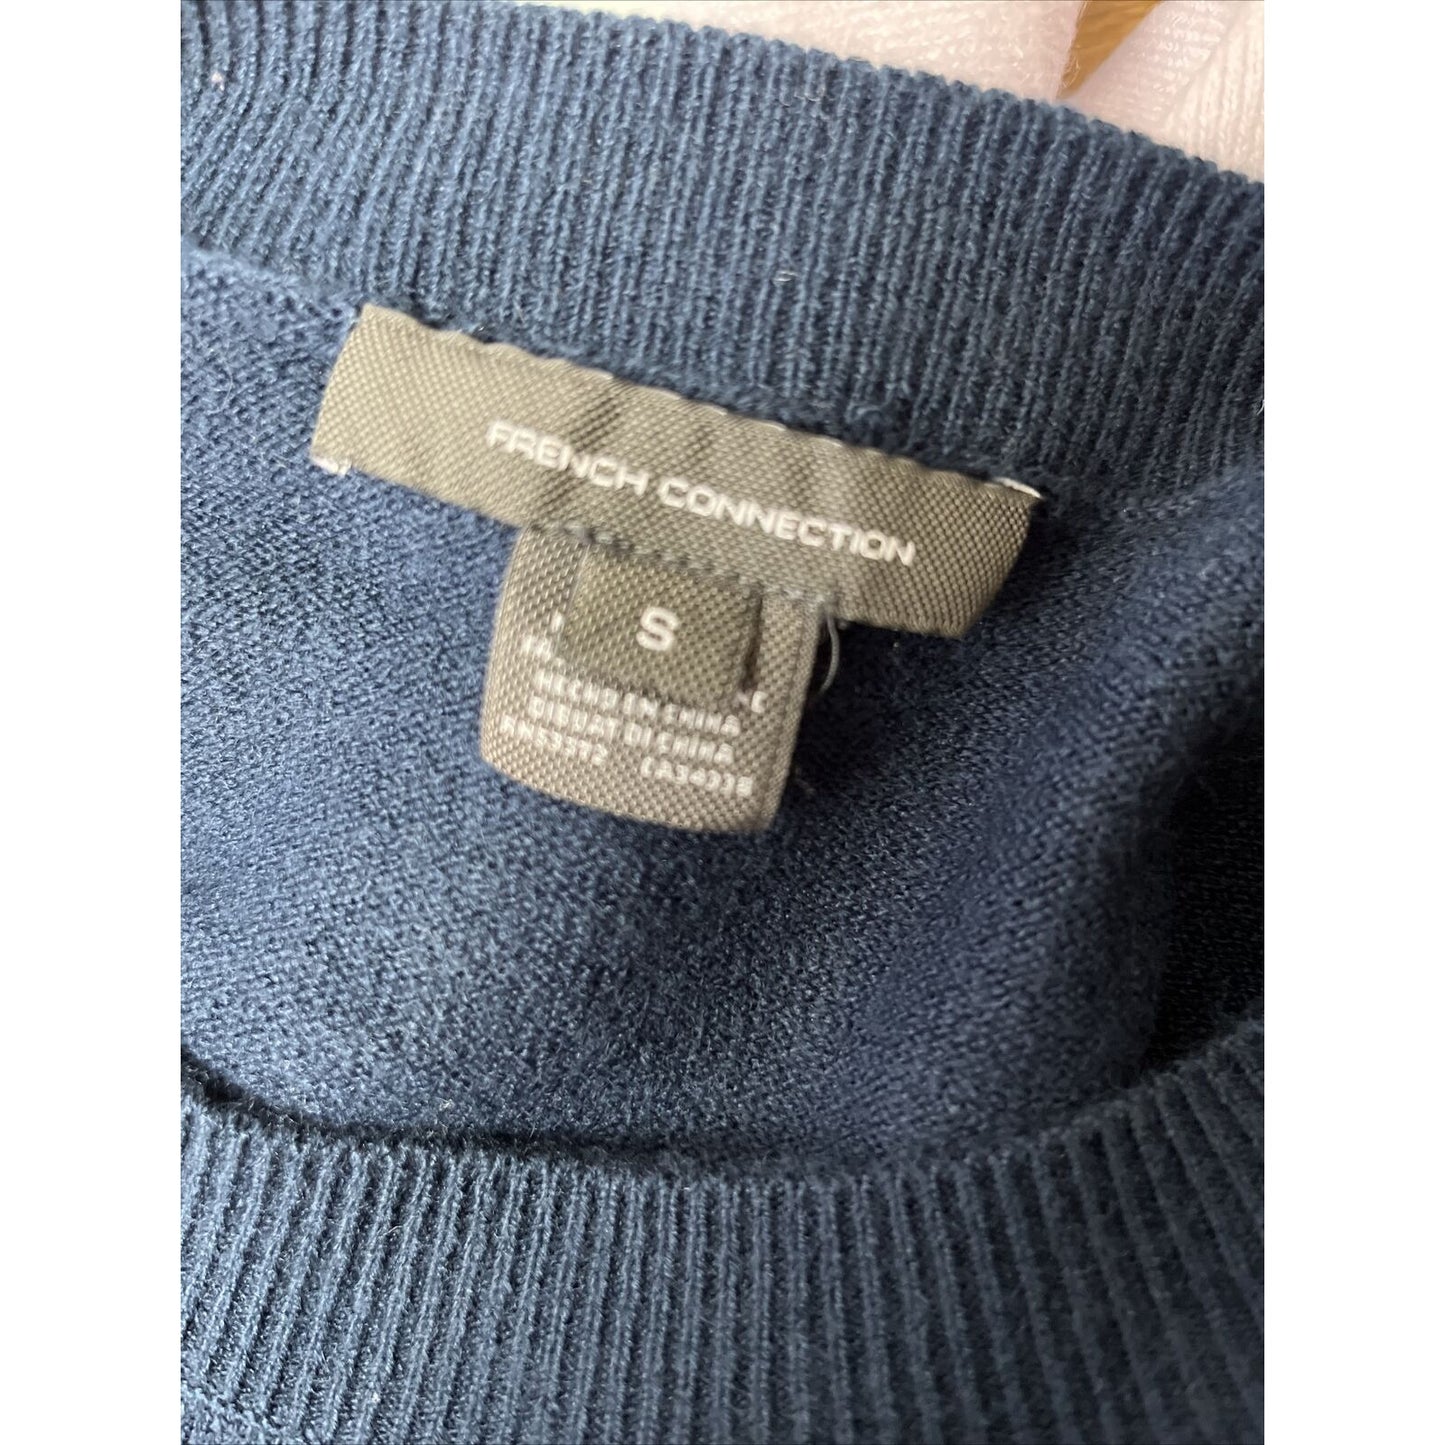 NWT French Connection Stripped Colorblock Sweater S